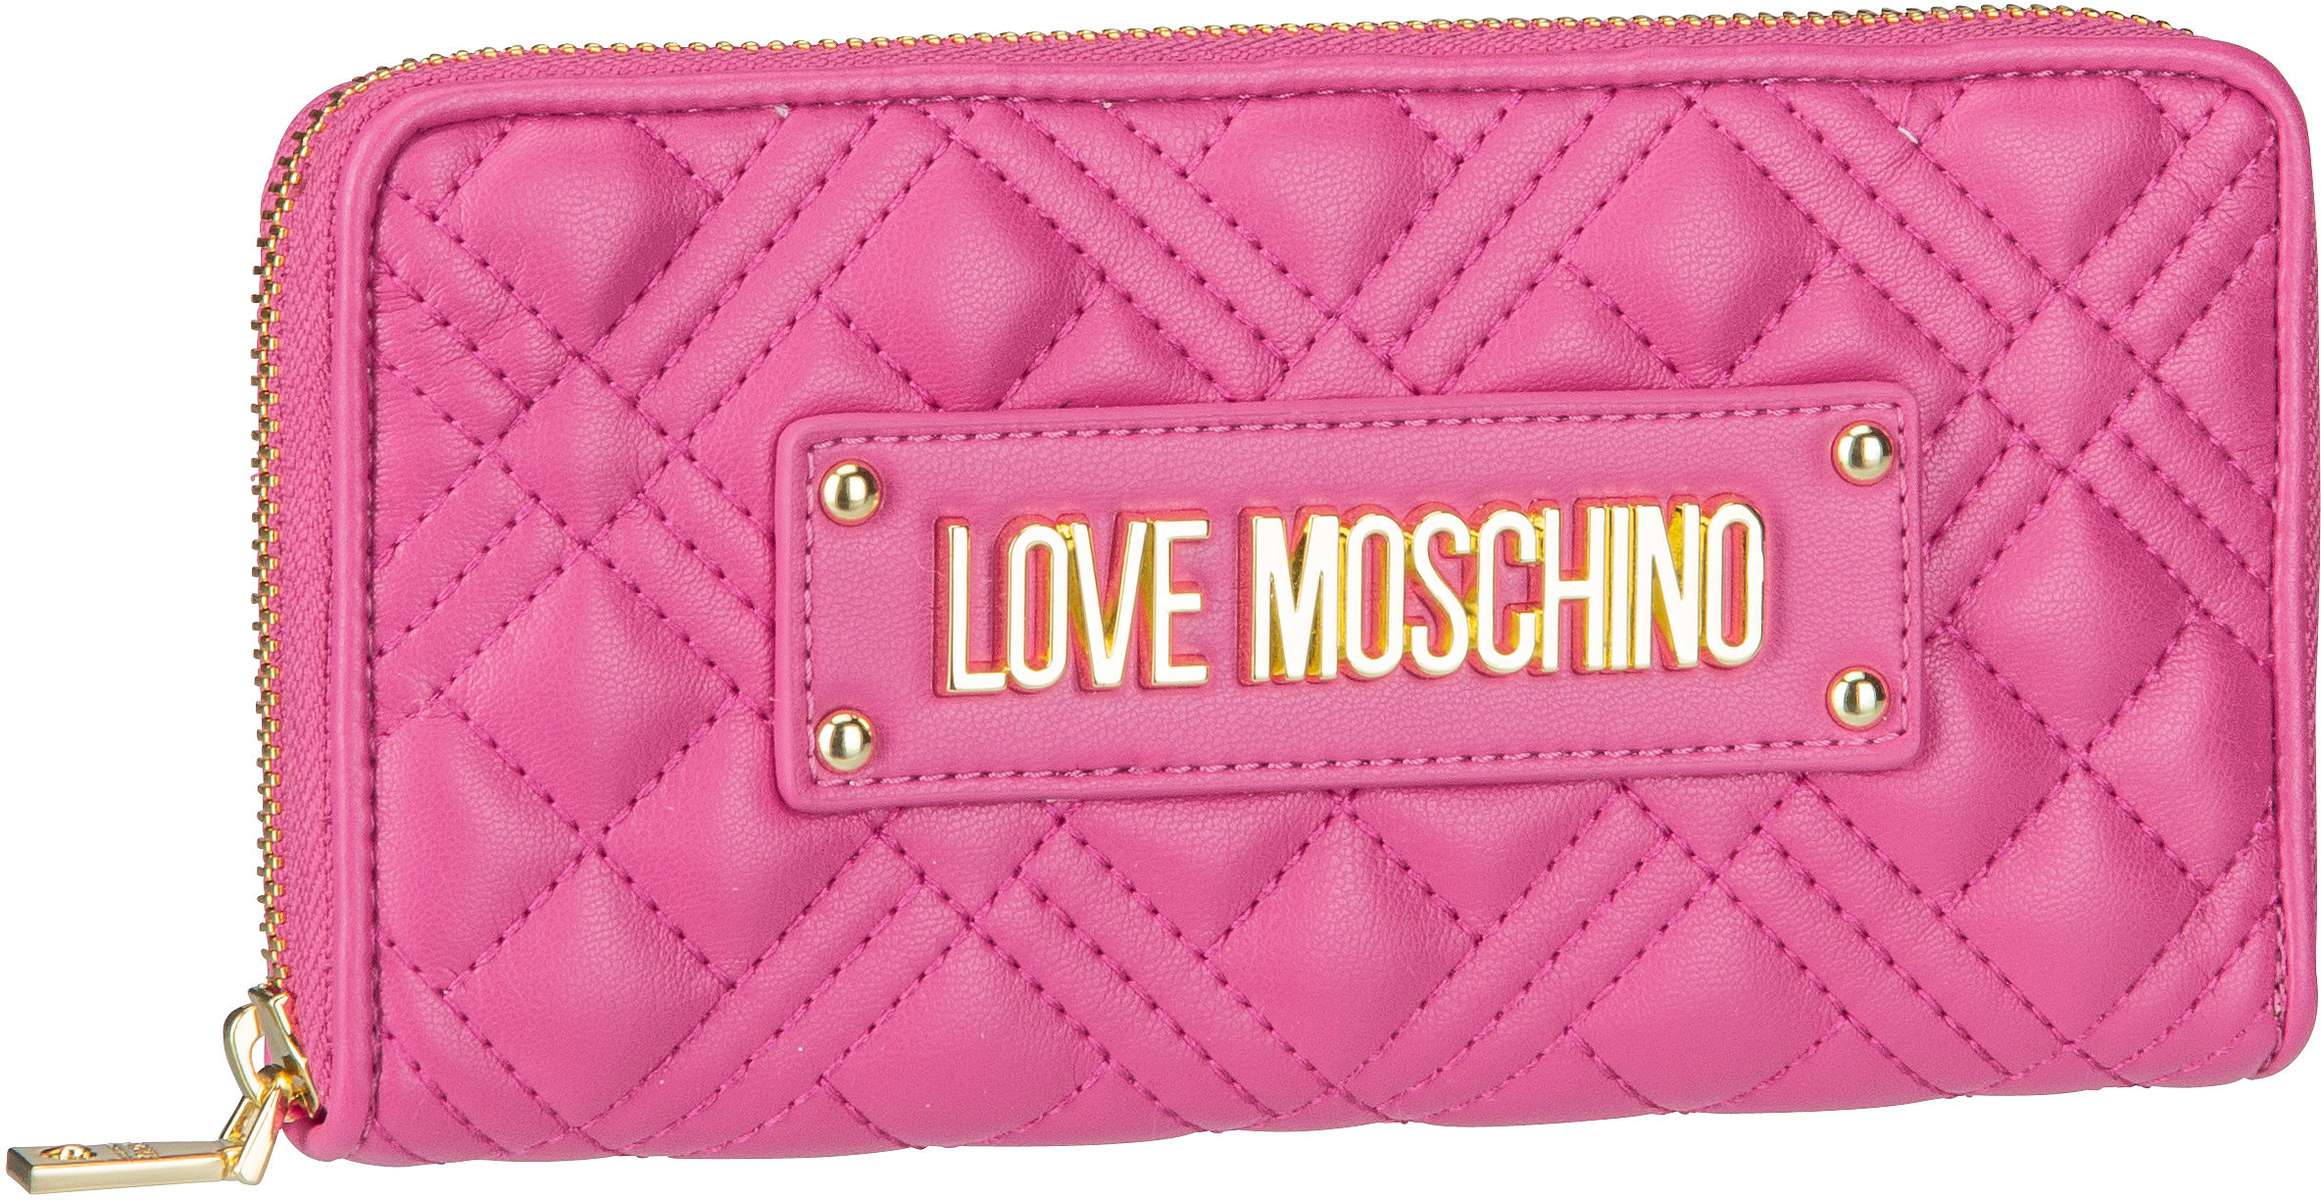 Love Moschino Quilted Wallet 5600 - Fuchsia